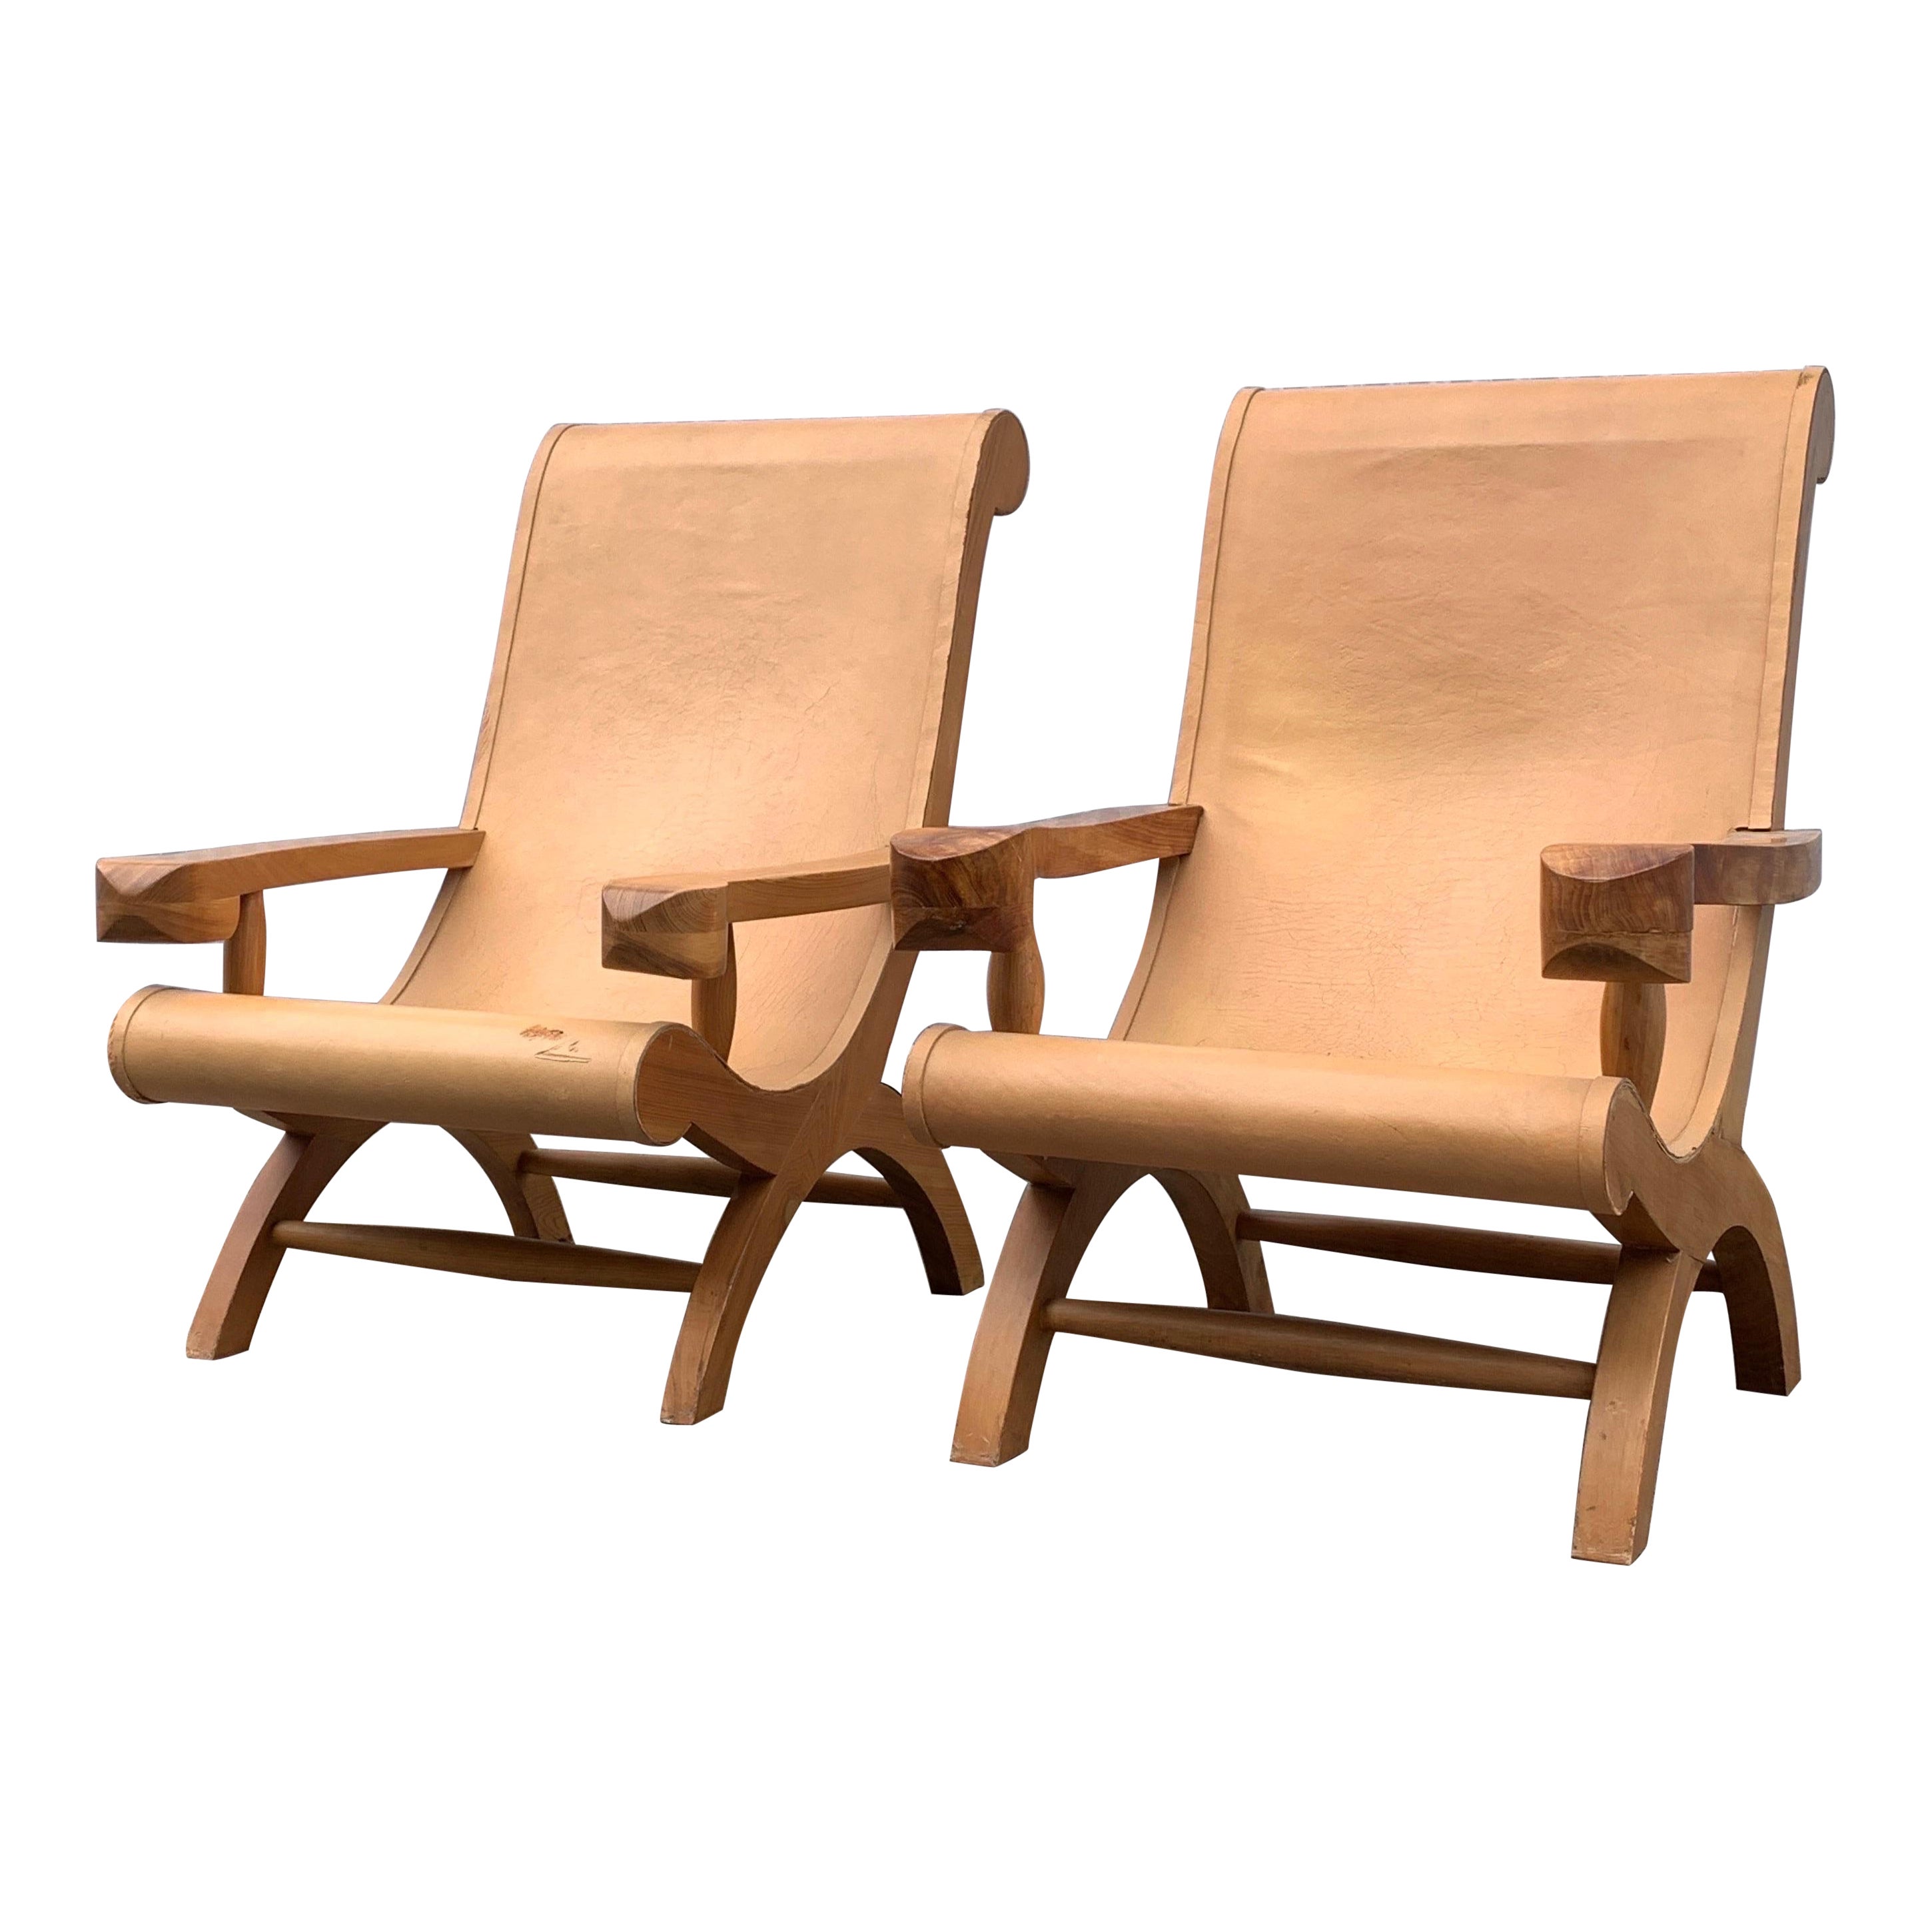 Clara Porset Lounge Chairs For Sale